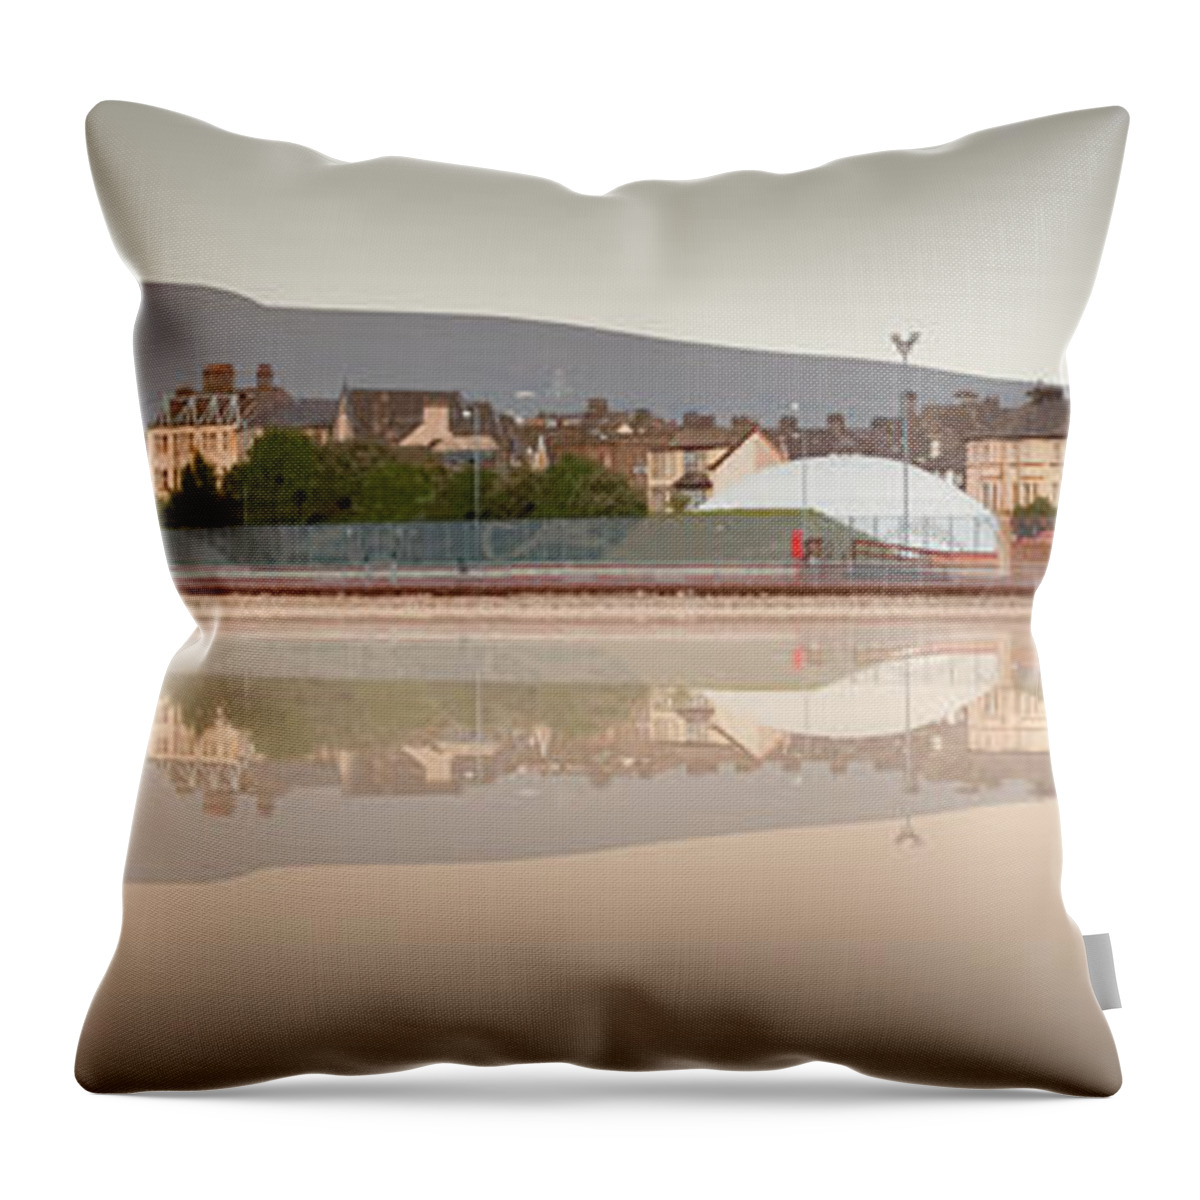 Morecambe Throw Pillow featuring the digital art Morecambe East 2 - Sepia by Joe Tamassy